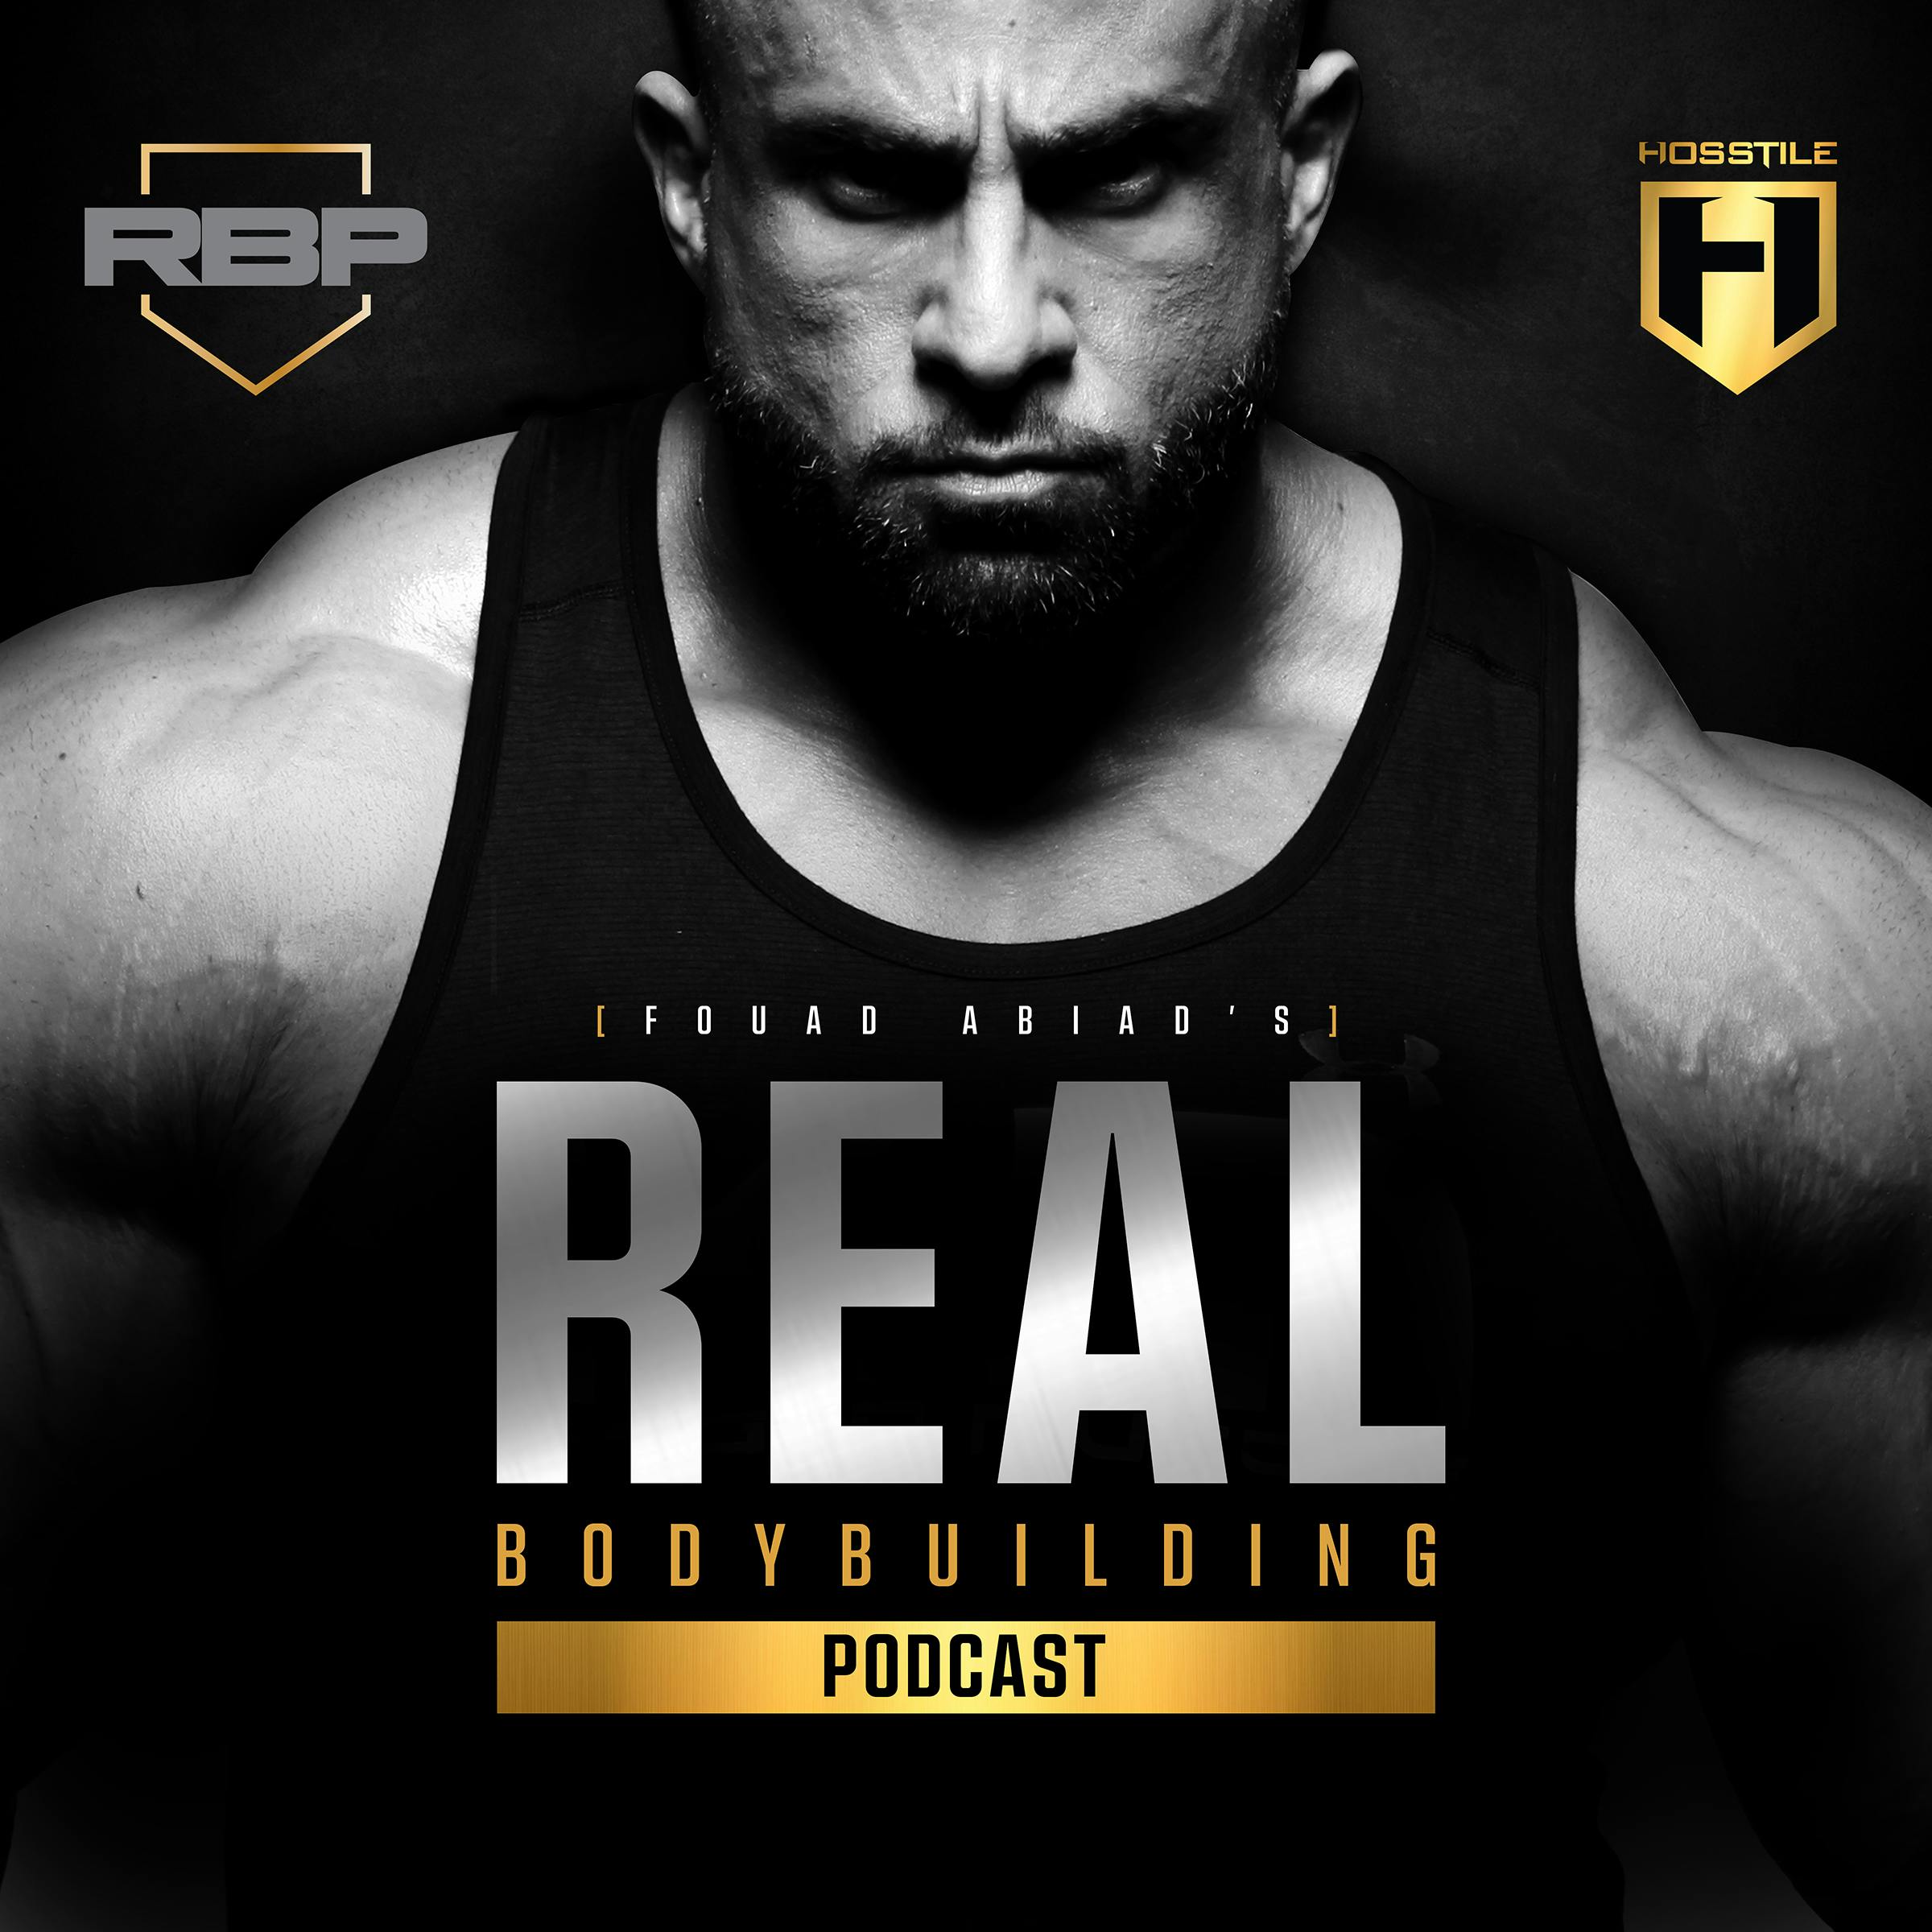 ARGUING WITH AN EXERCISE SCIENTIST |Fouad Abiad, Mike Isratel, Iain Valliere & Mike Van Wyck  Bro Chat #149